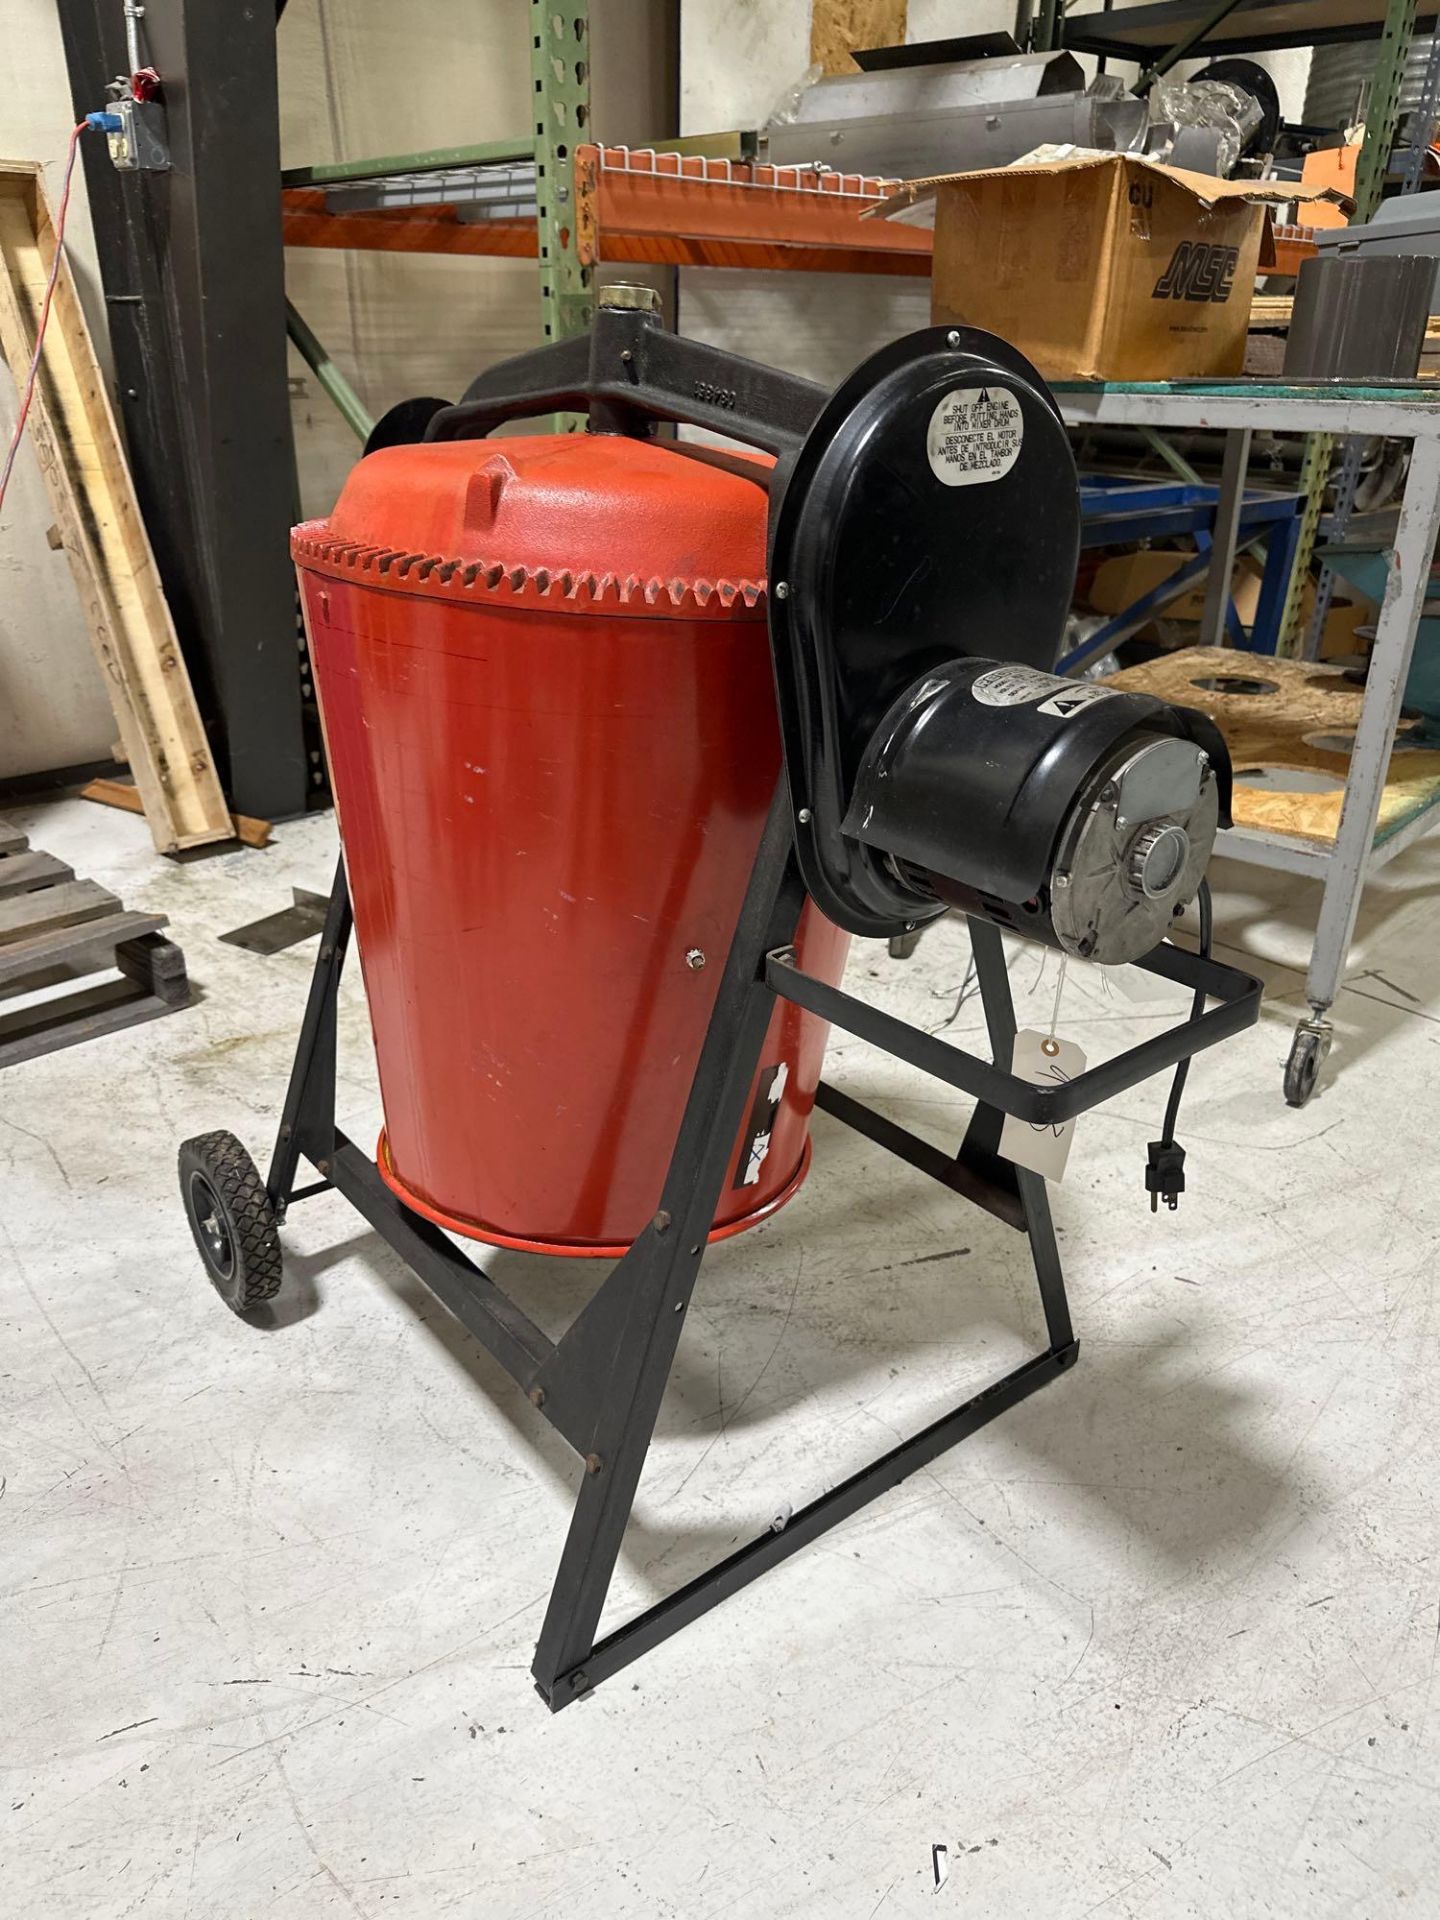 Red Lion RLX Resin Material Mixer, 110V, s/n 1395 - Image 2 of 6